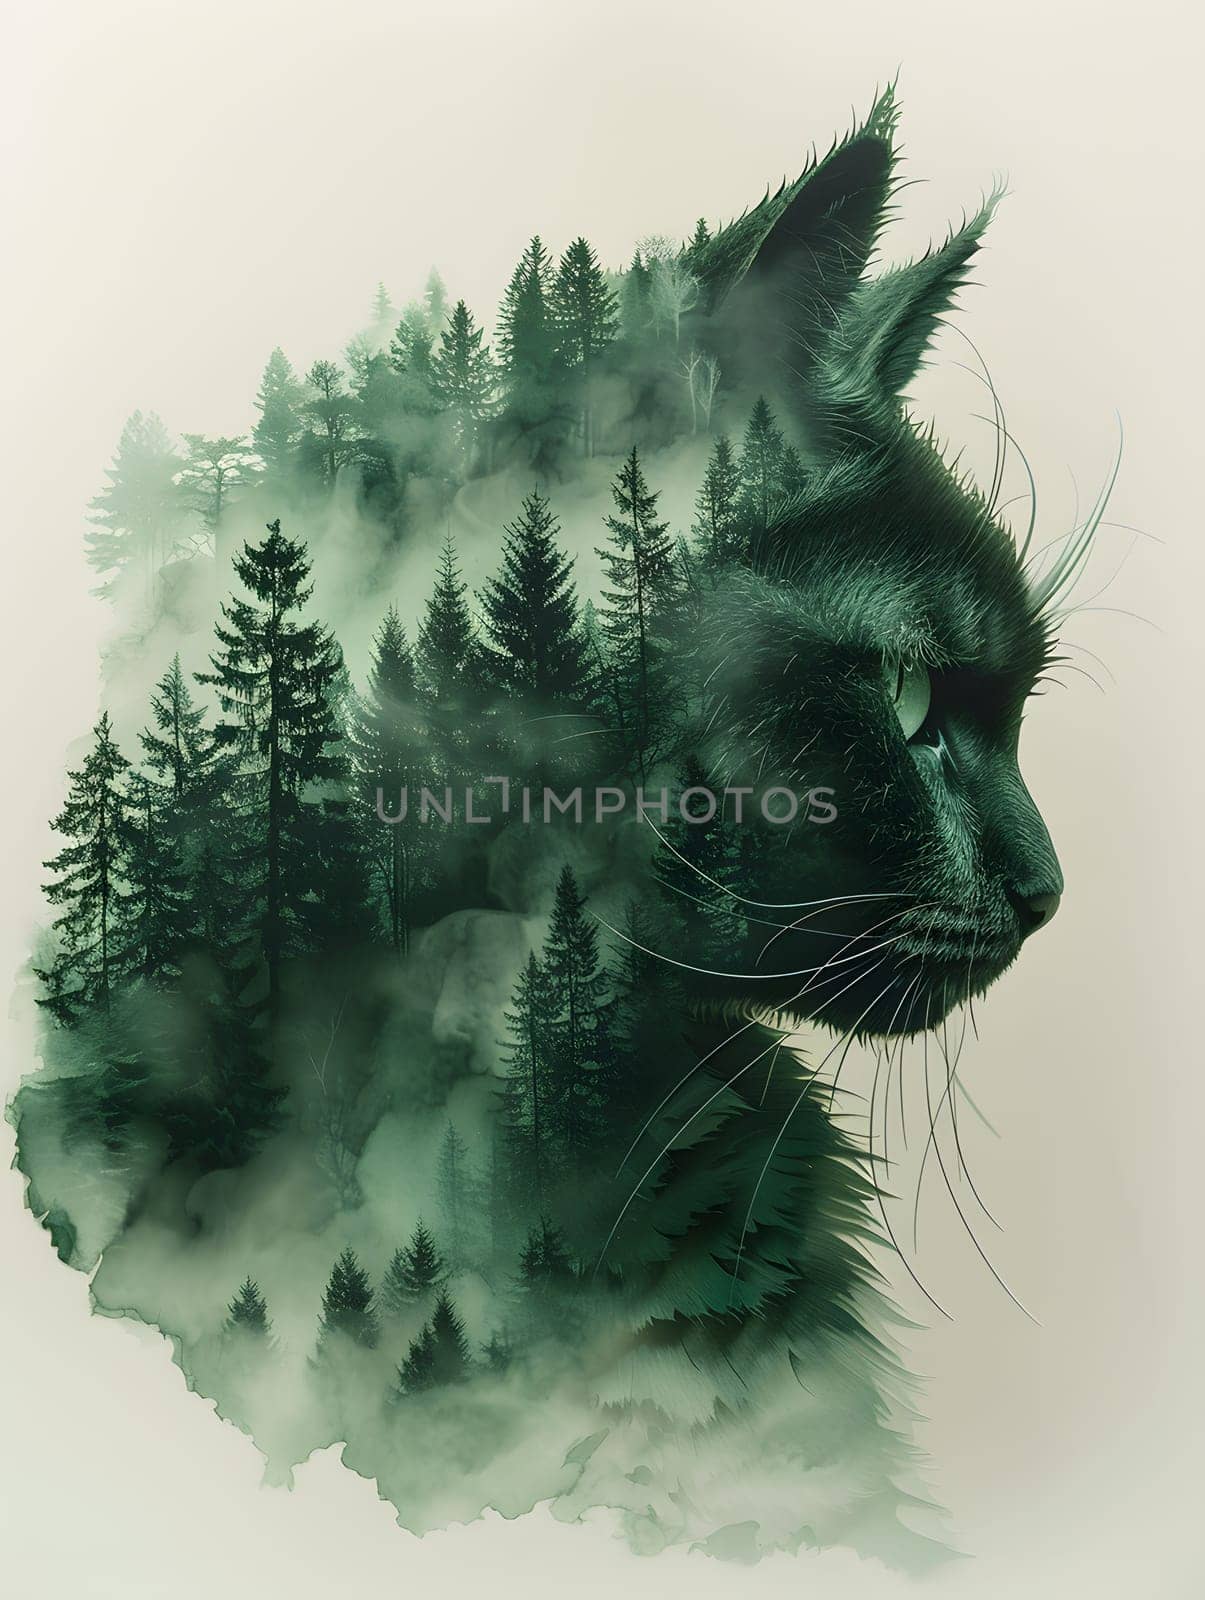 Feline double exposure cat with trees in background by Nadtochiy